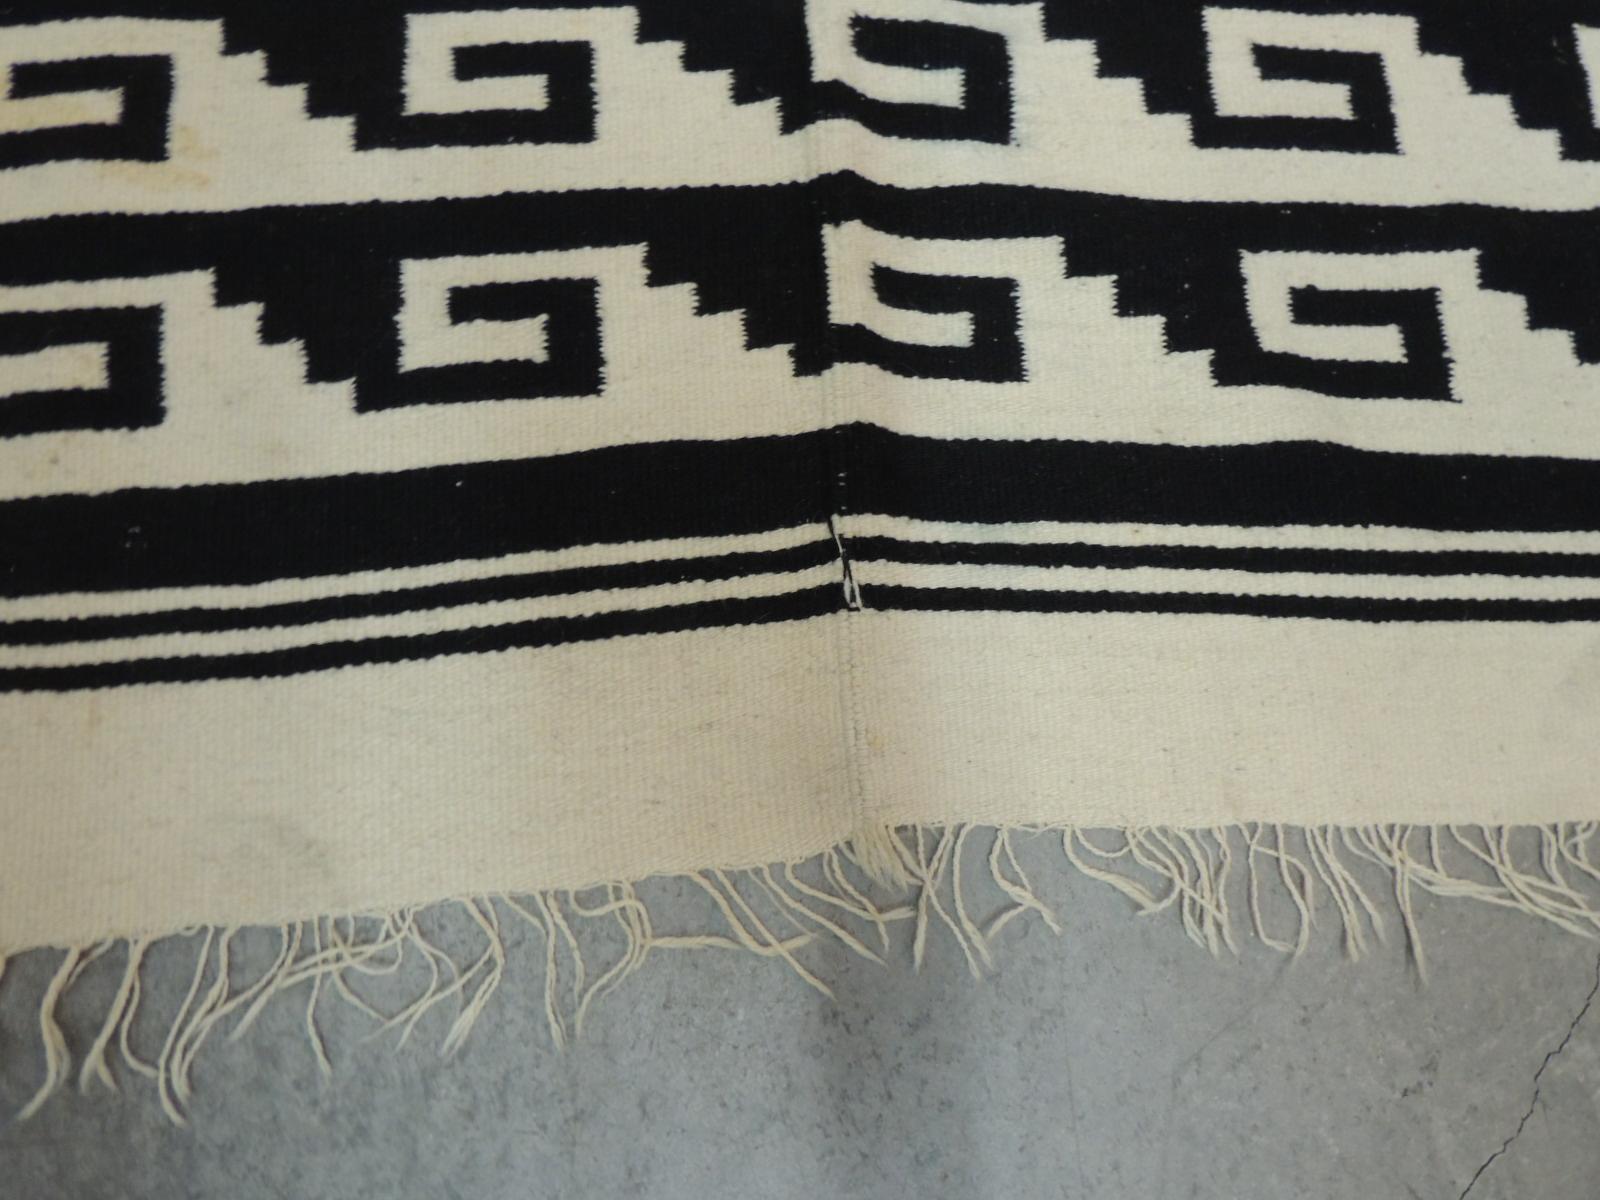 Vintage Woven Natural and Black Peruvian Flat-Weave Rug or Throw In Good Condition For Sale In Oakland Park, FL